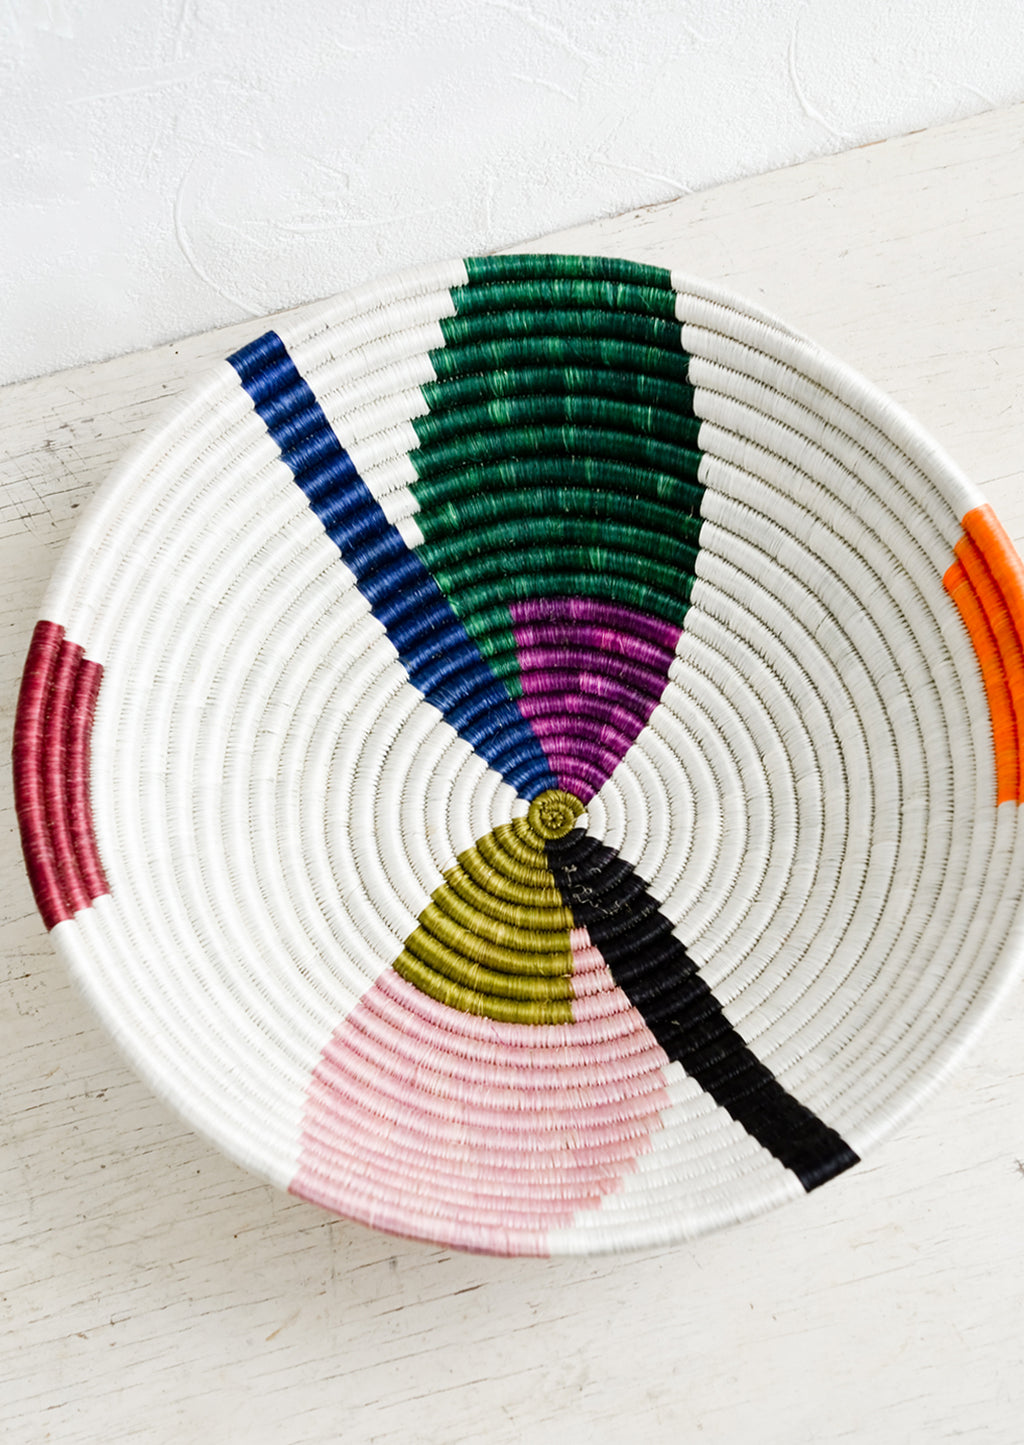 1: A large woven sweetgrass bowl in white with colorful abstract shapes.